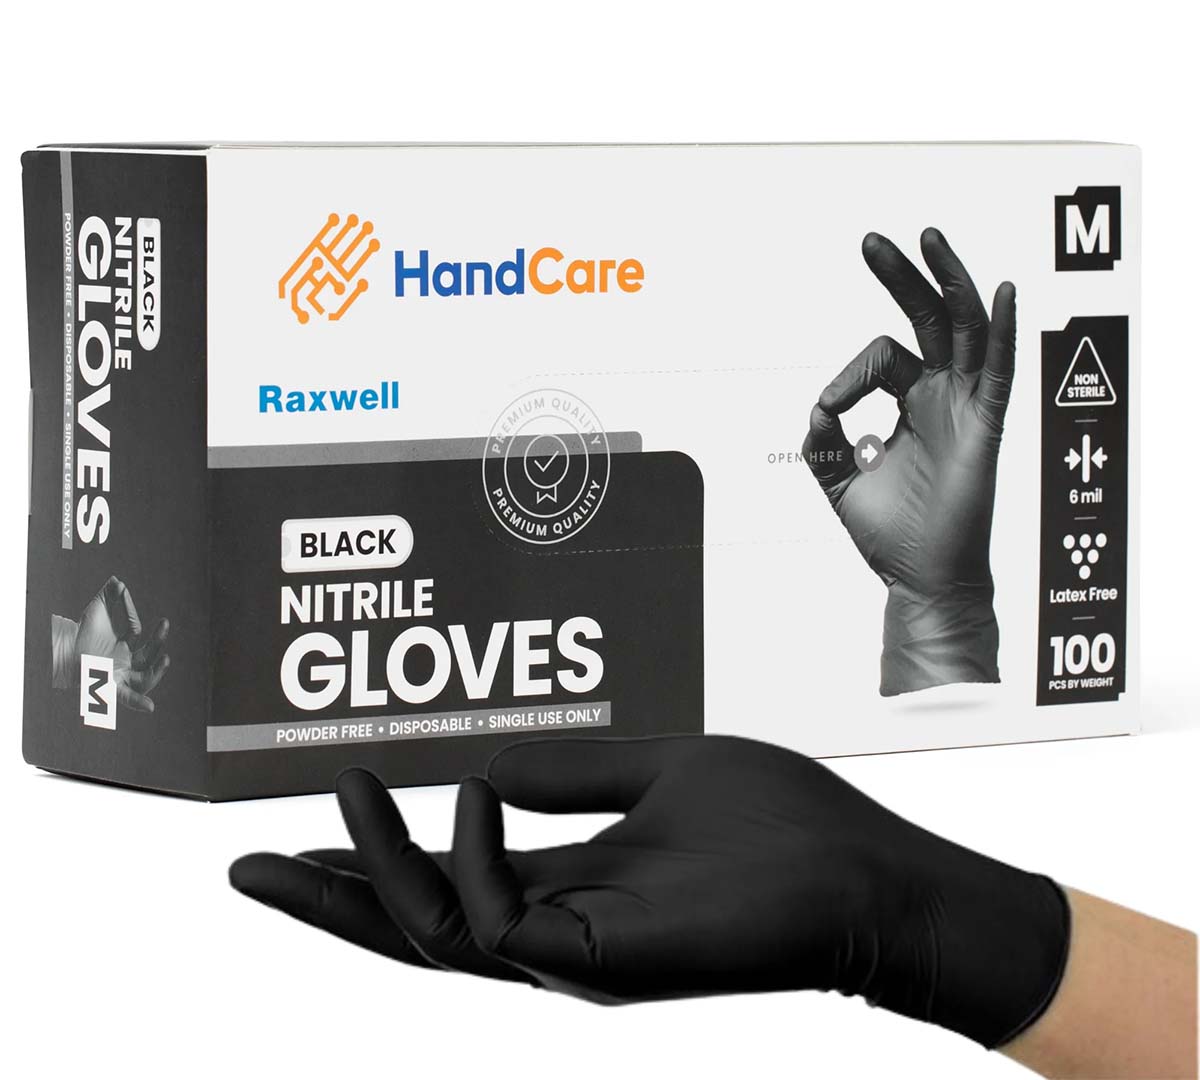 A hand and box displaying Hand Care Black Nitrile Gloves.